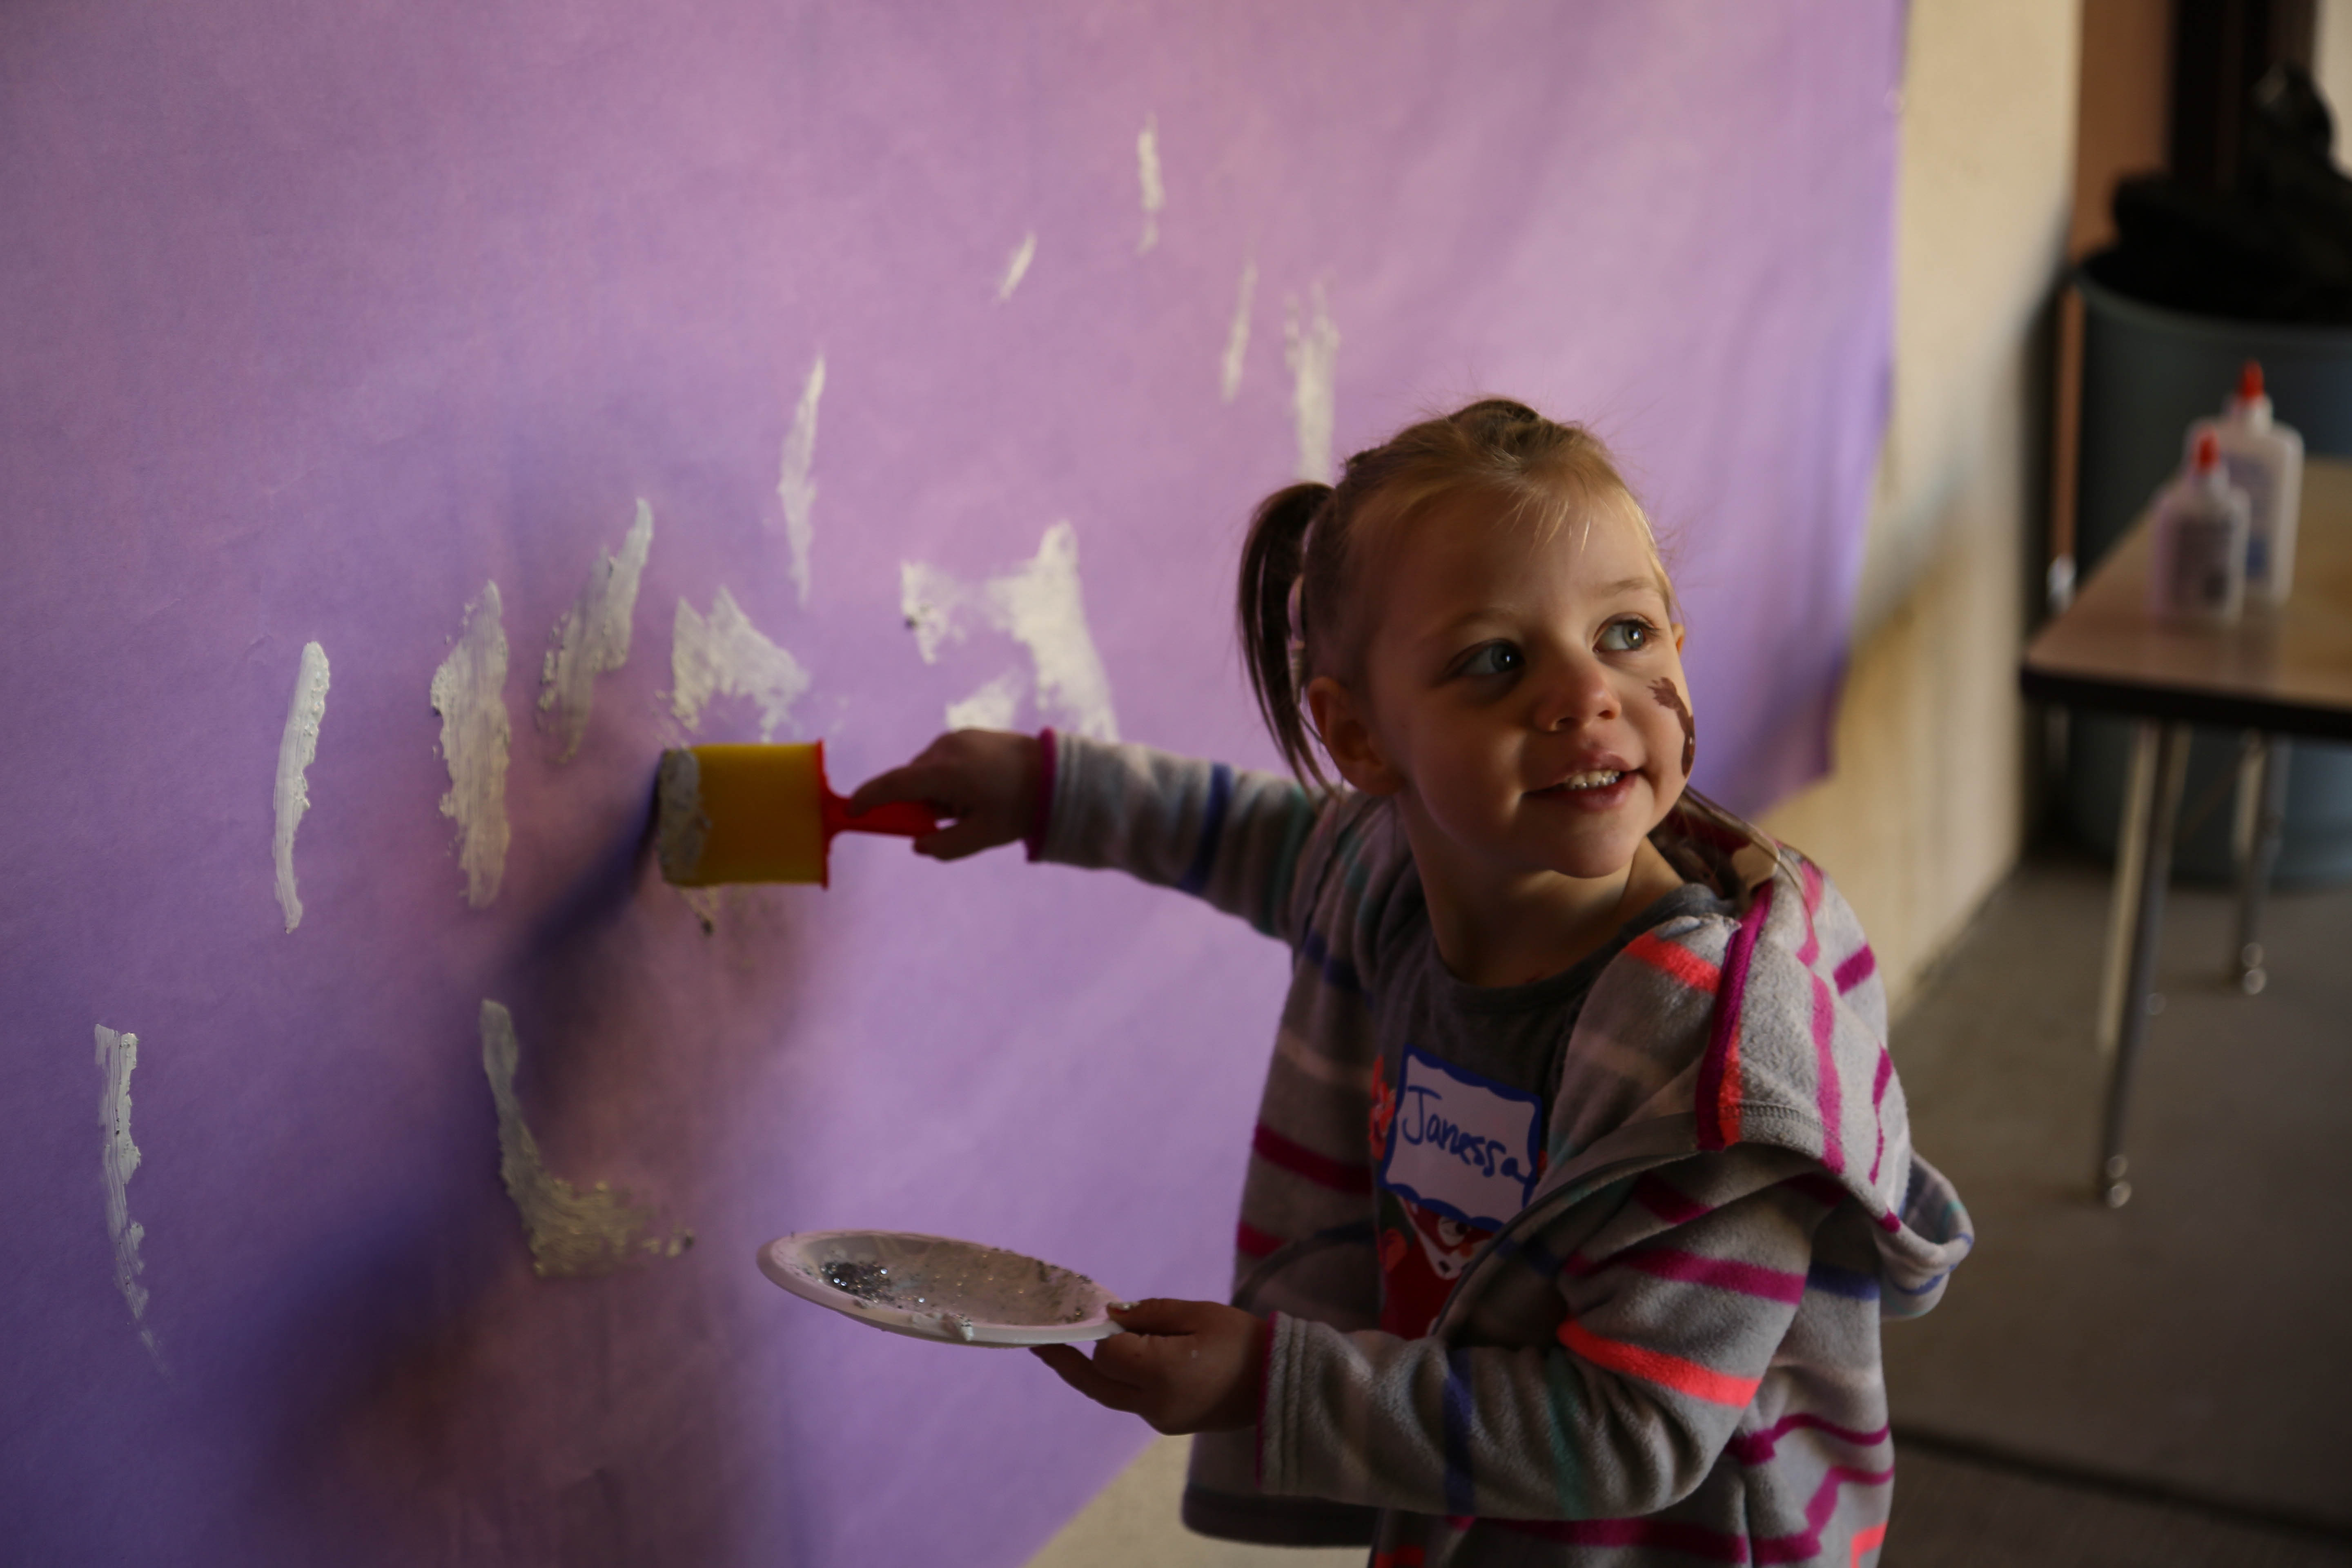 Child with paint on face drawing on wall